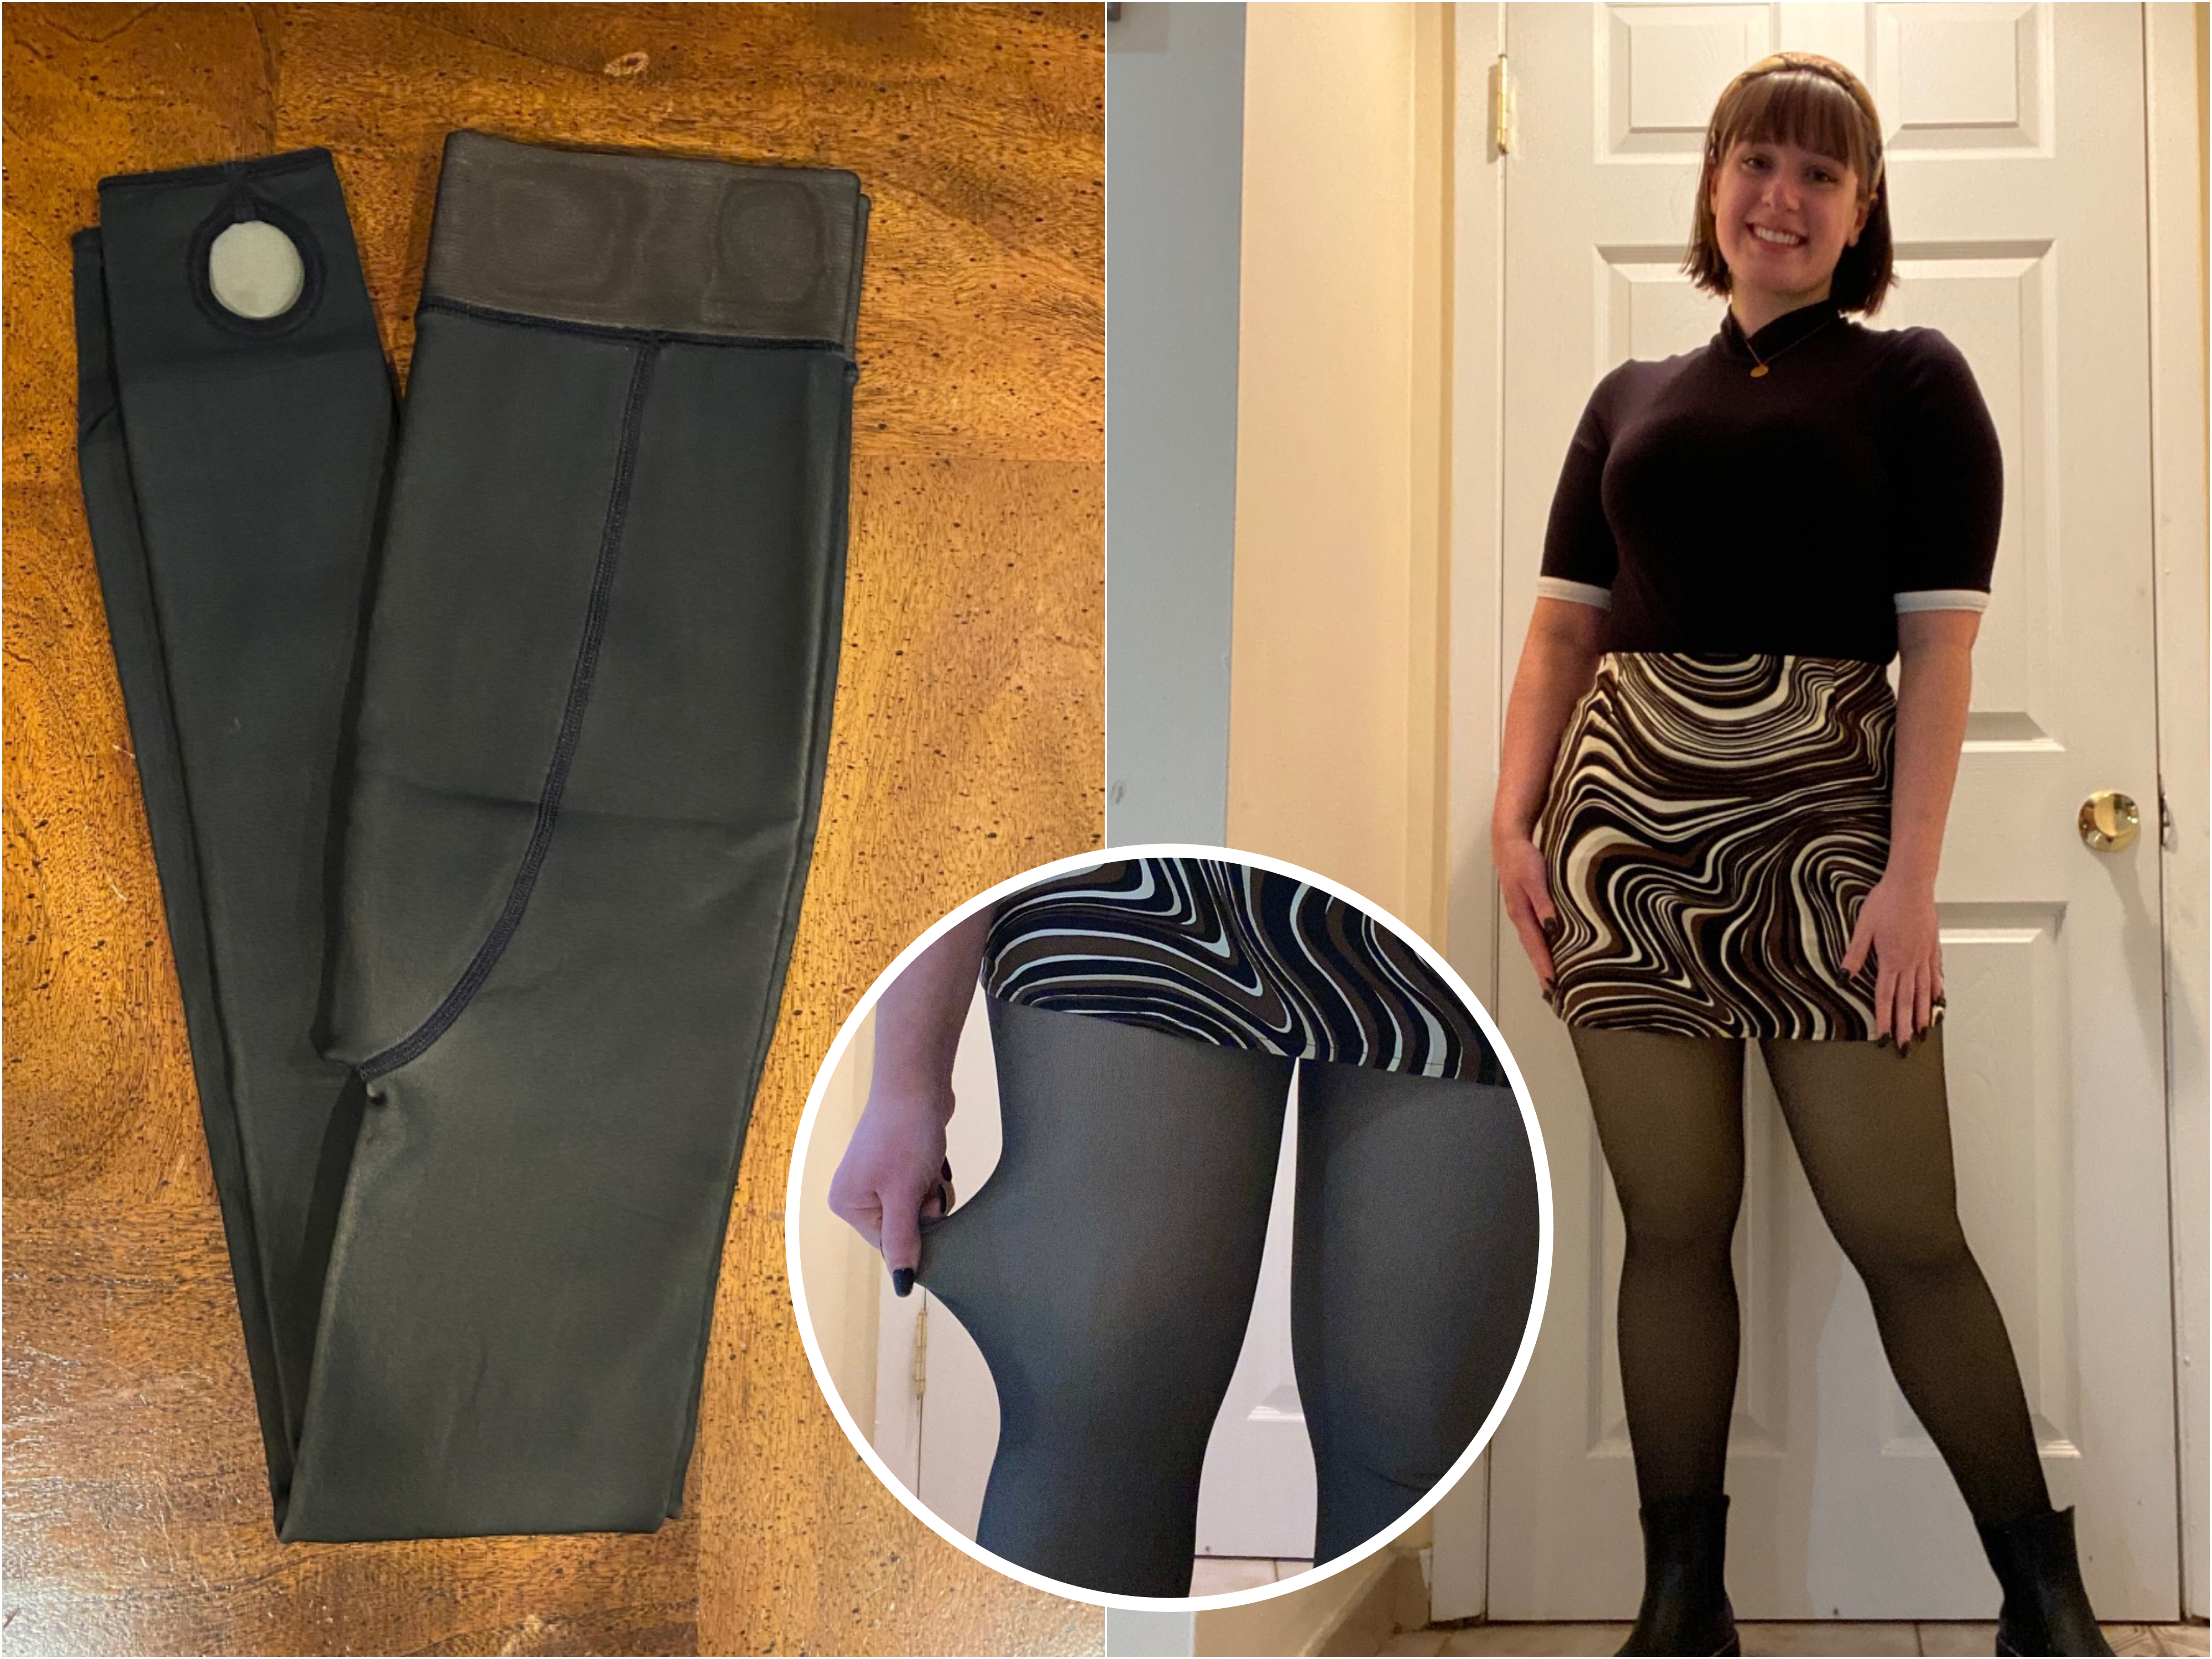 I tried the fleece-lined 'sheer' tights that TikTokers love, and